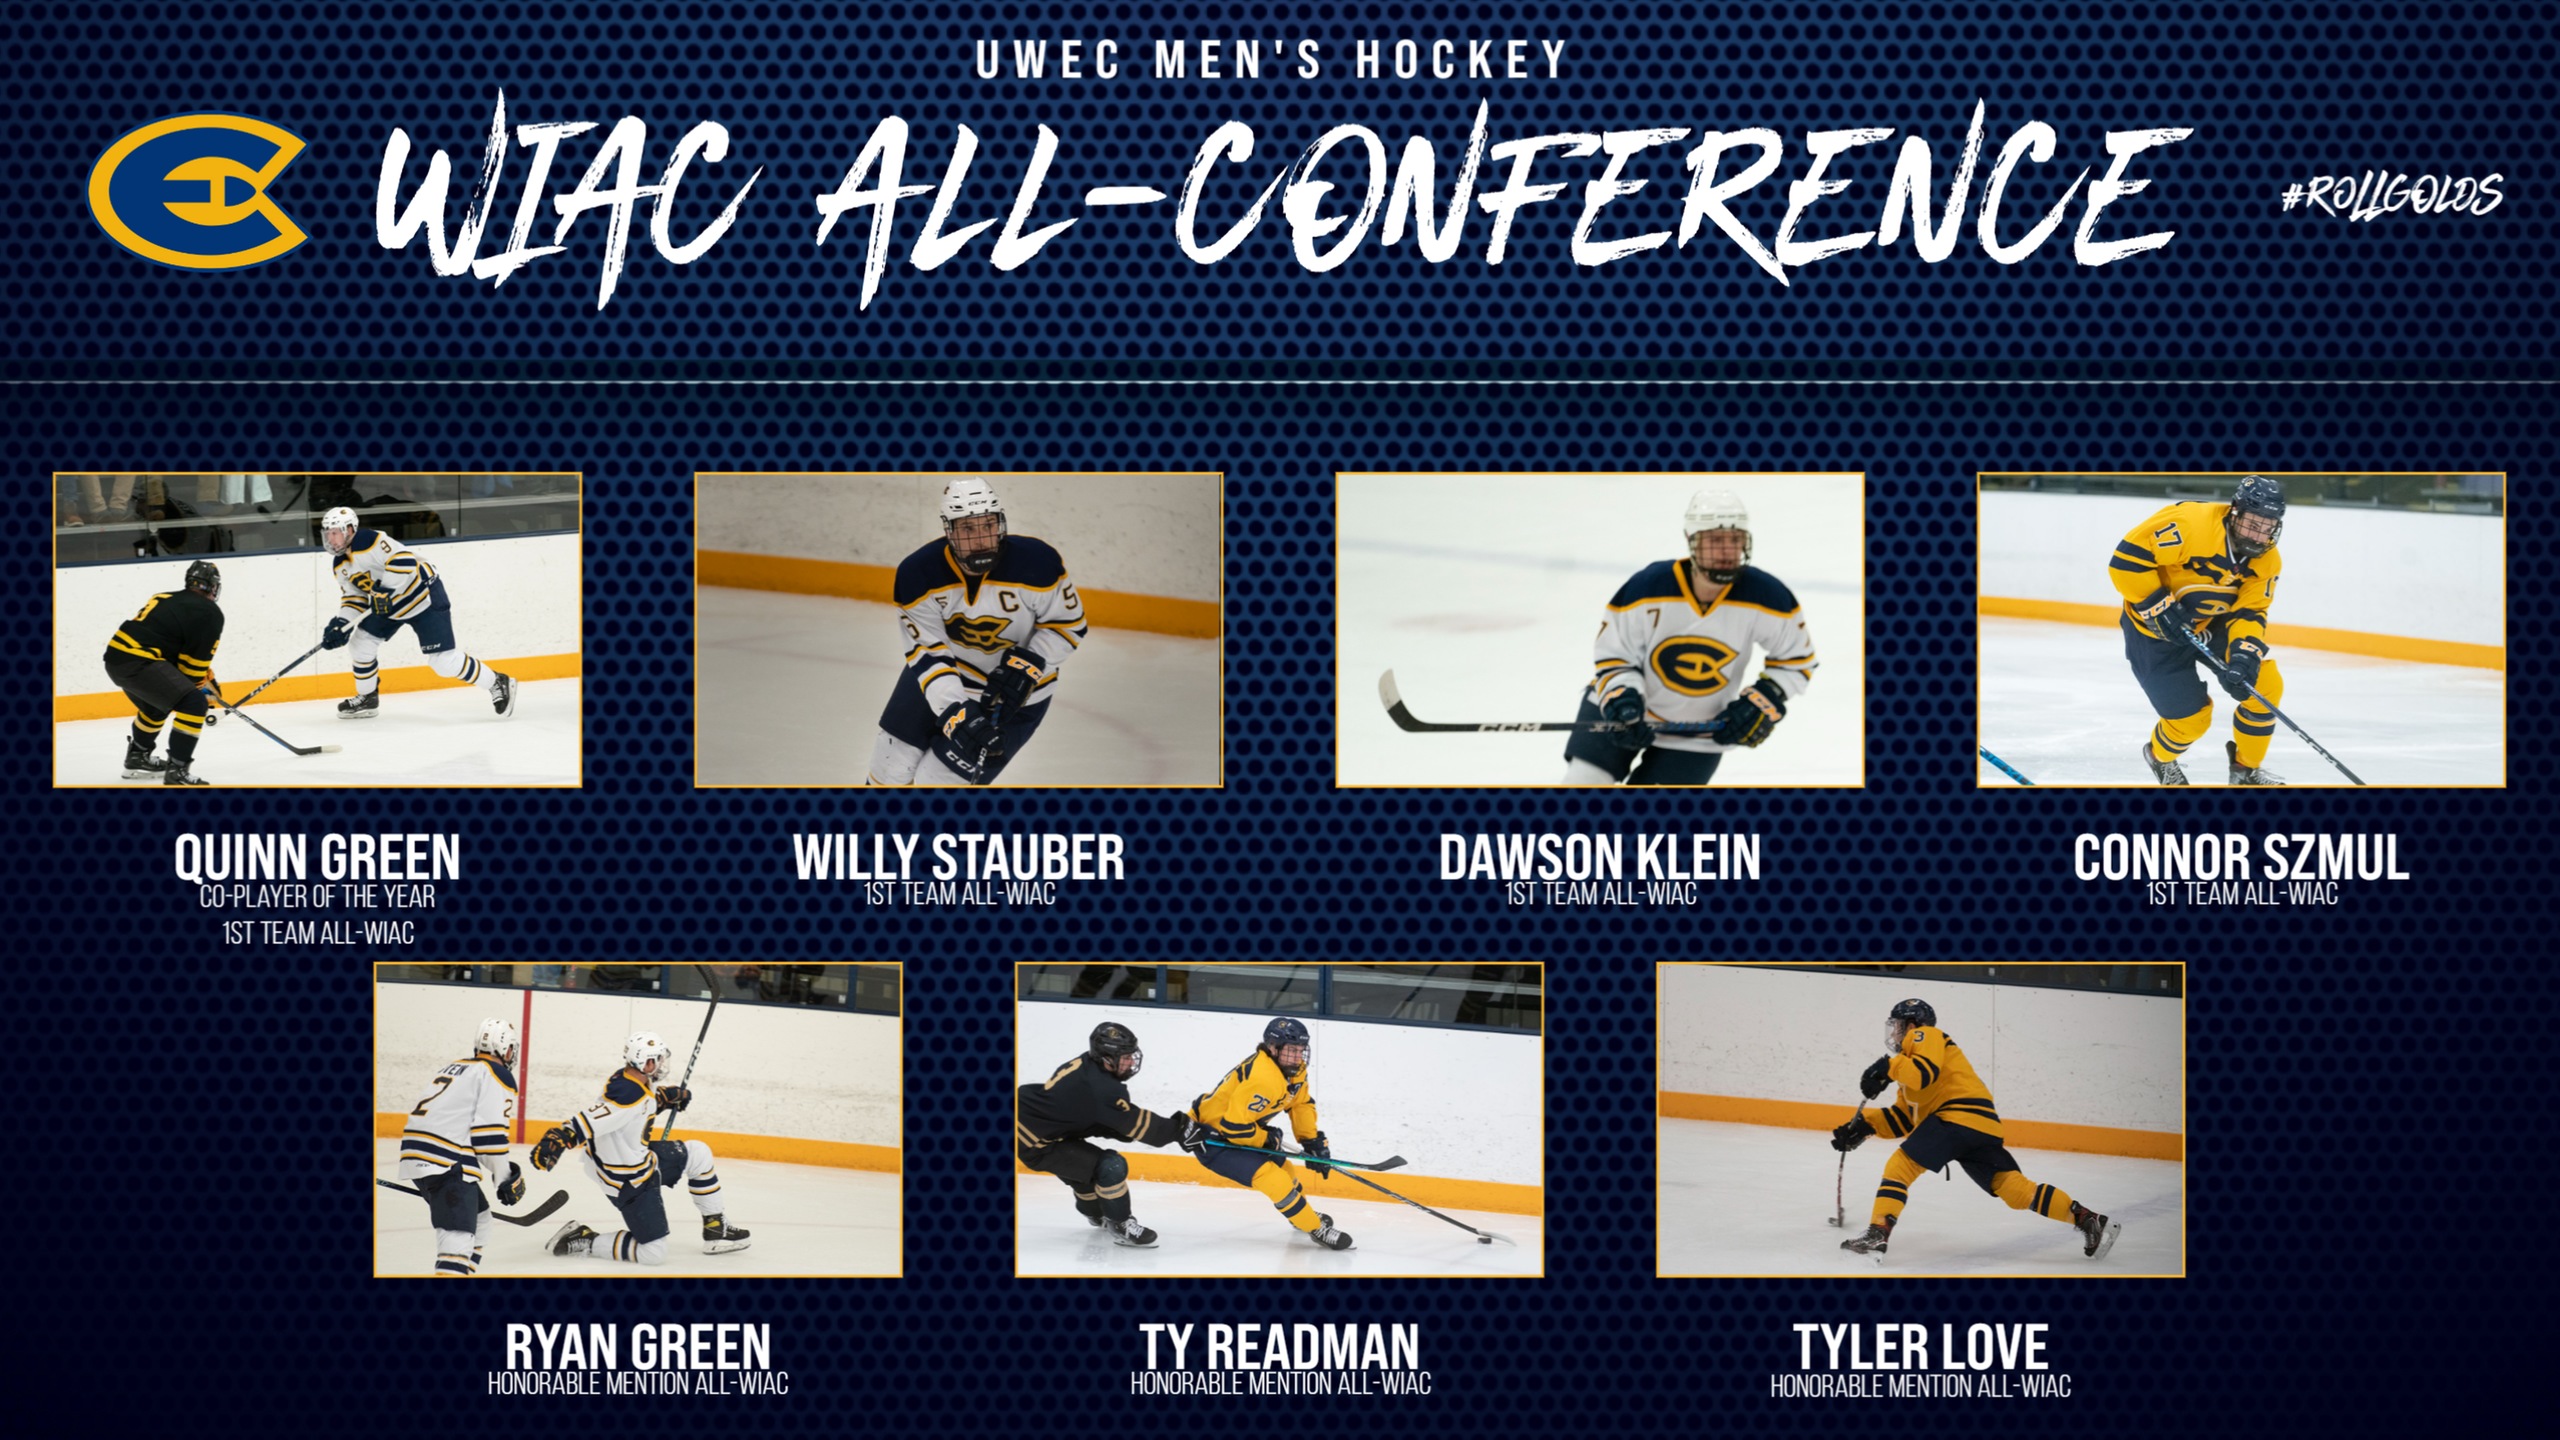 Green named Co-Player of the Year; Six Others Earn All-WIAC Honors